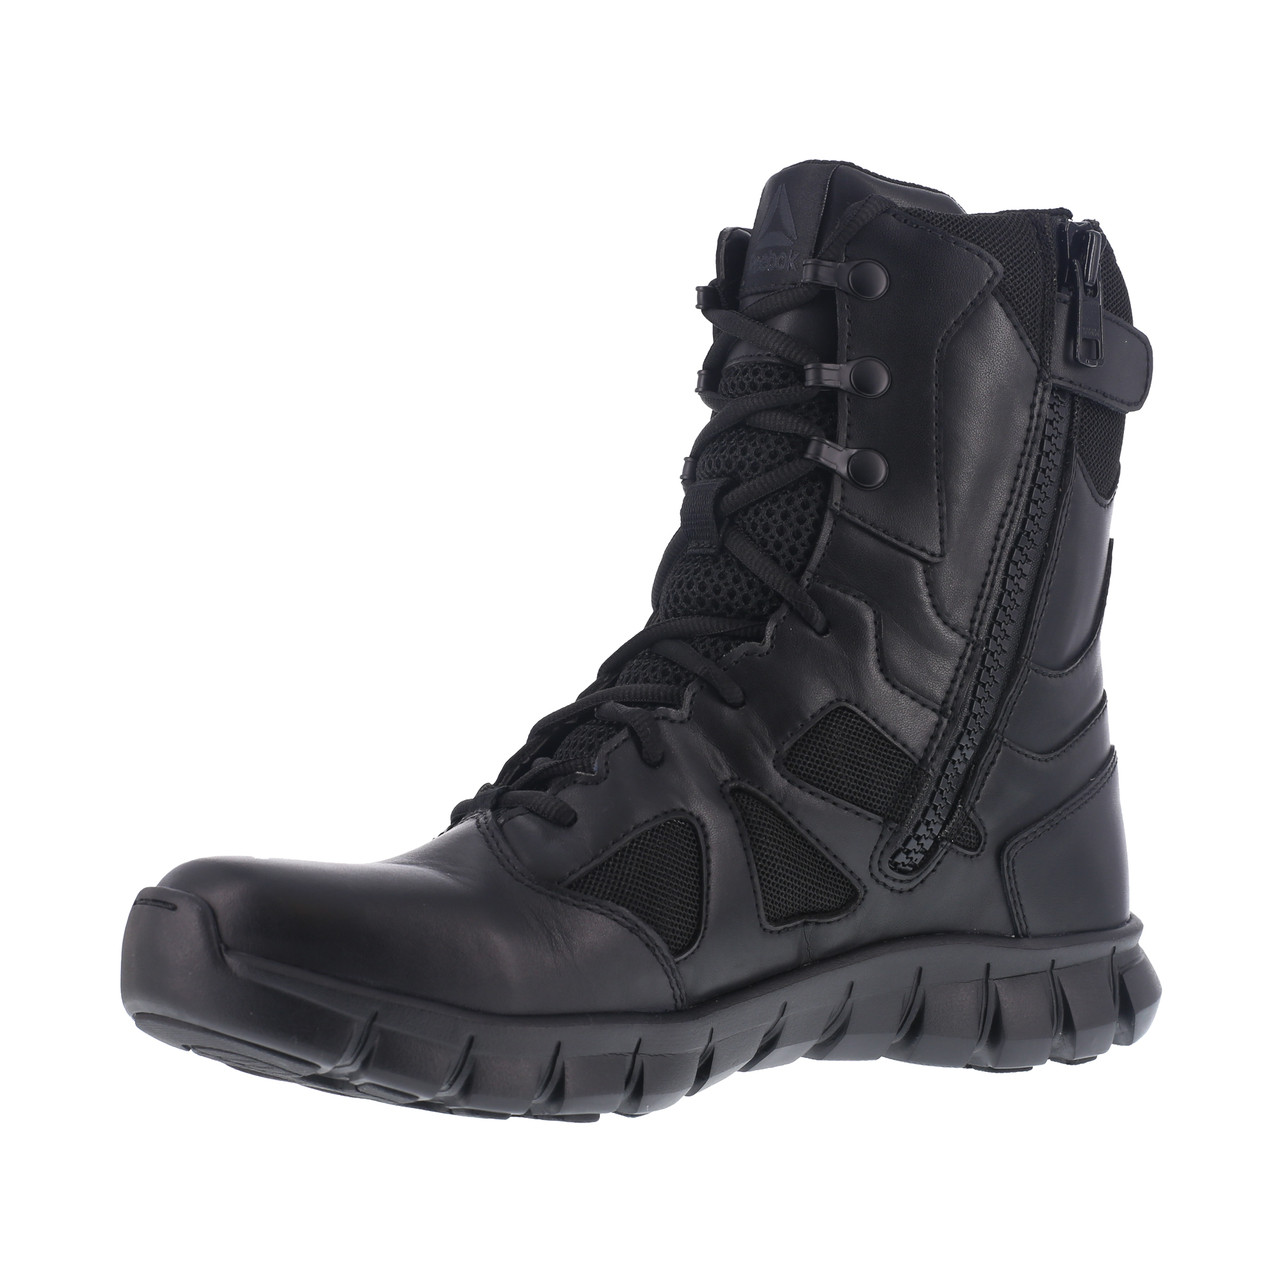 Reebok Sublite Cushion Tactical Boot East Coast Emergency Manchester, New Hampshire, 03103